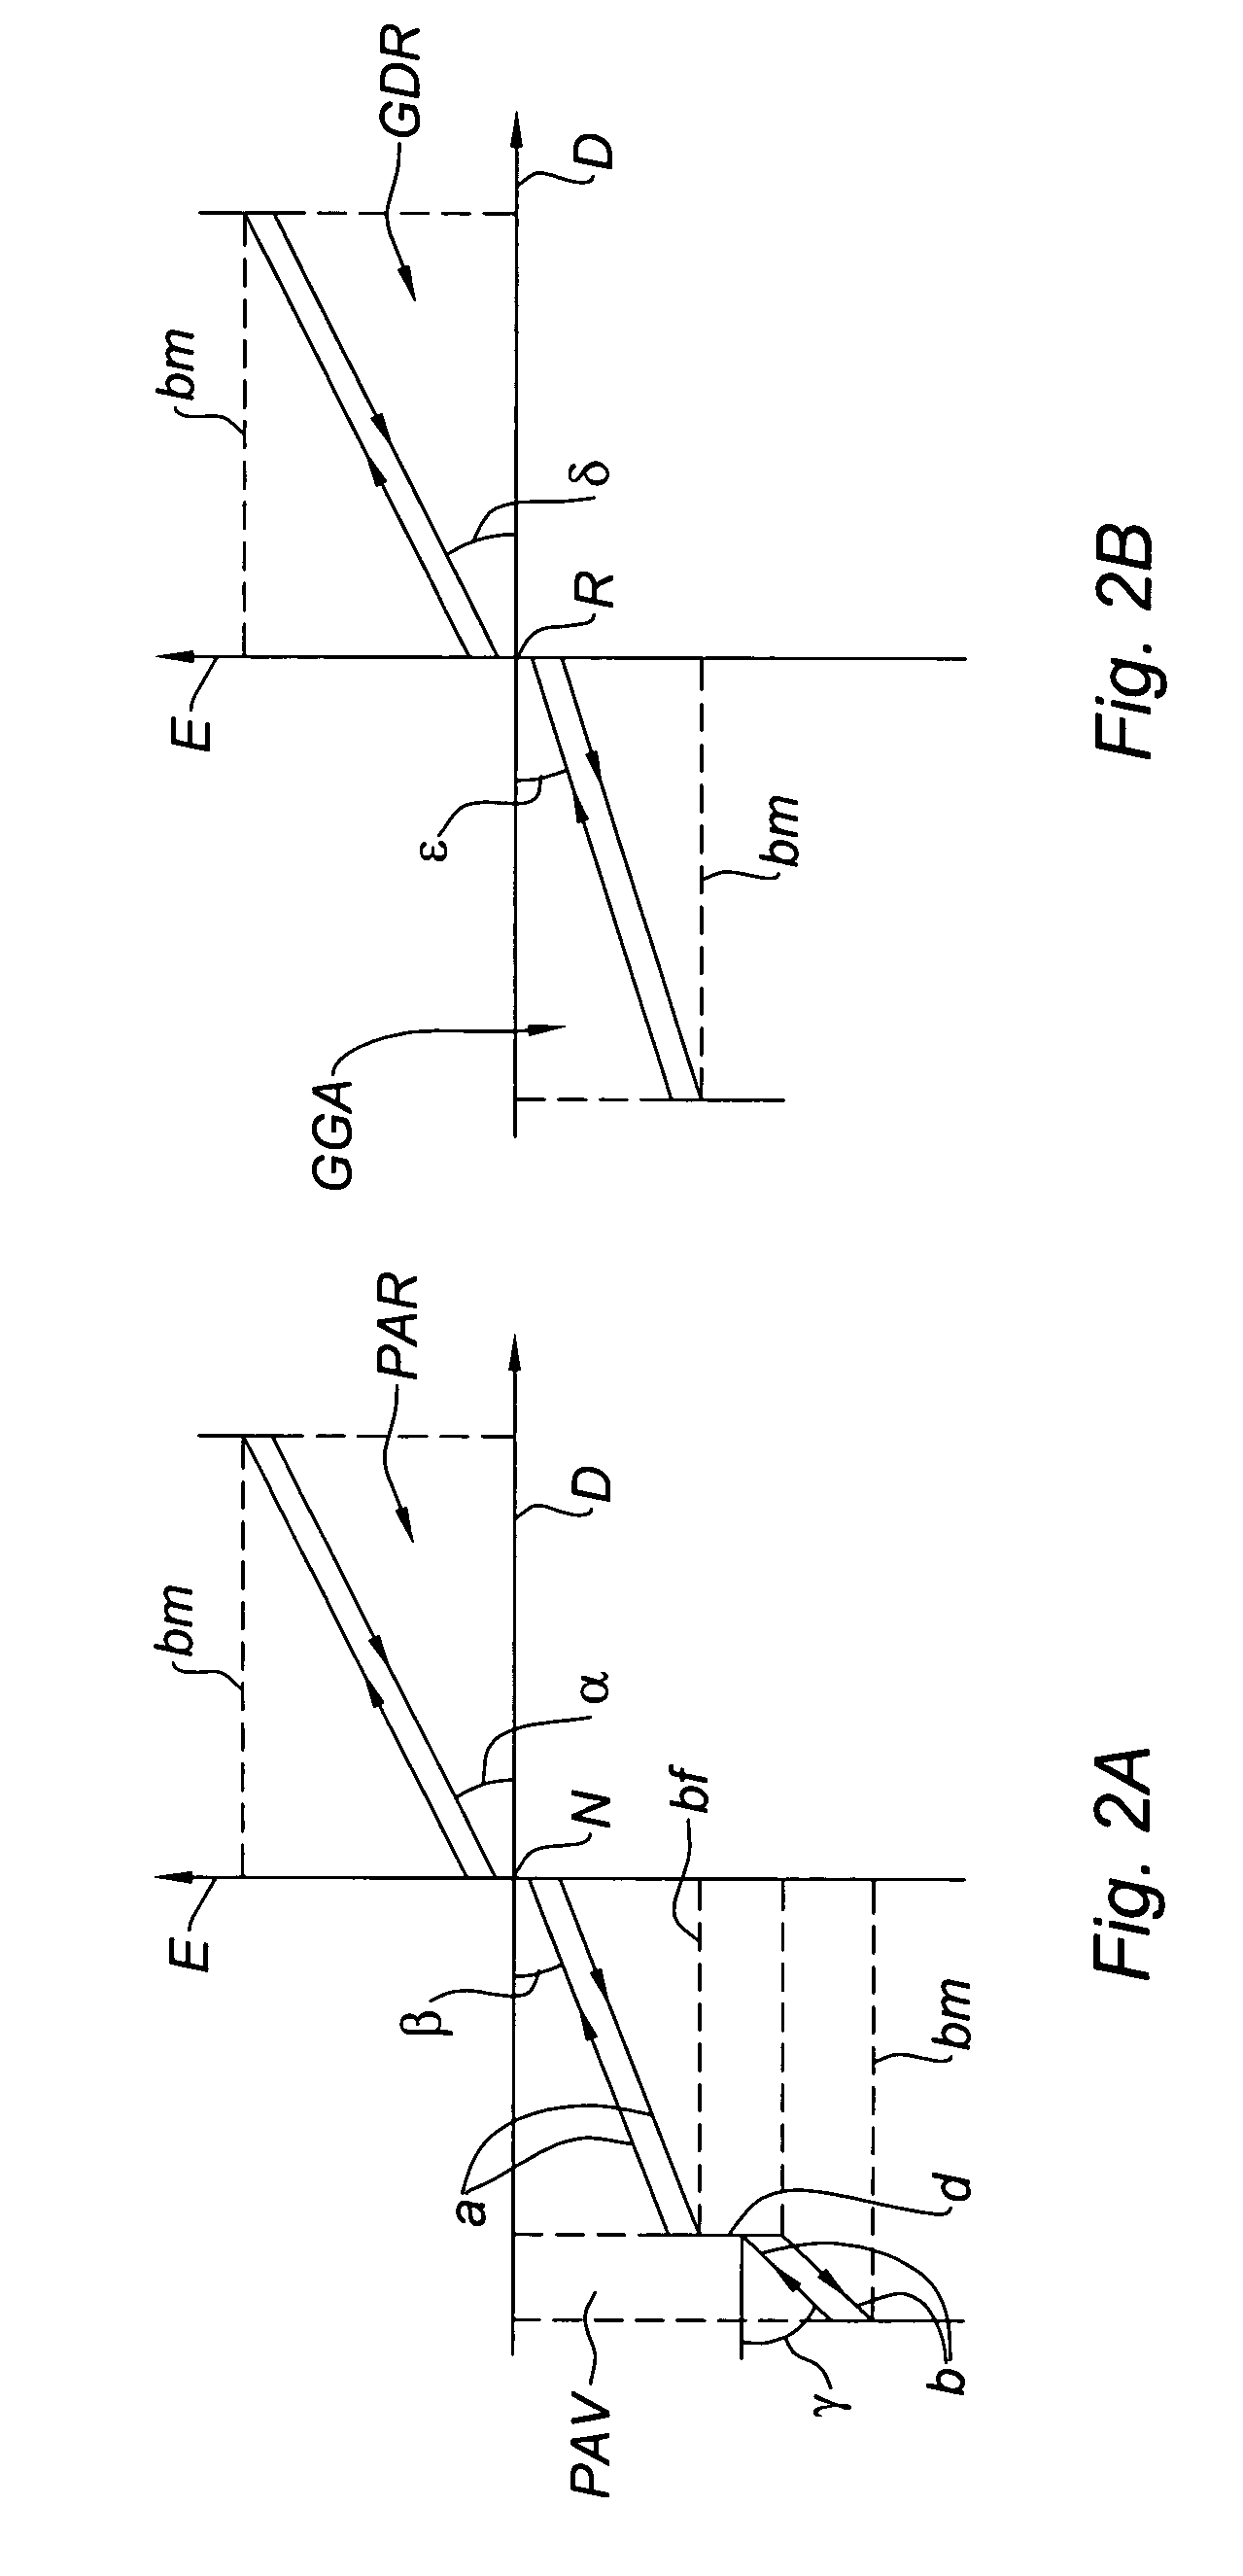 Control system including two control columns that are coupled to enable controlled members to be placed in required positions